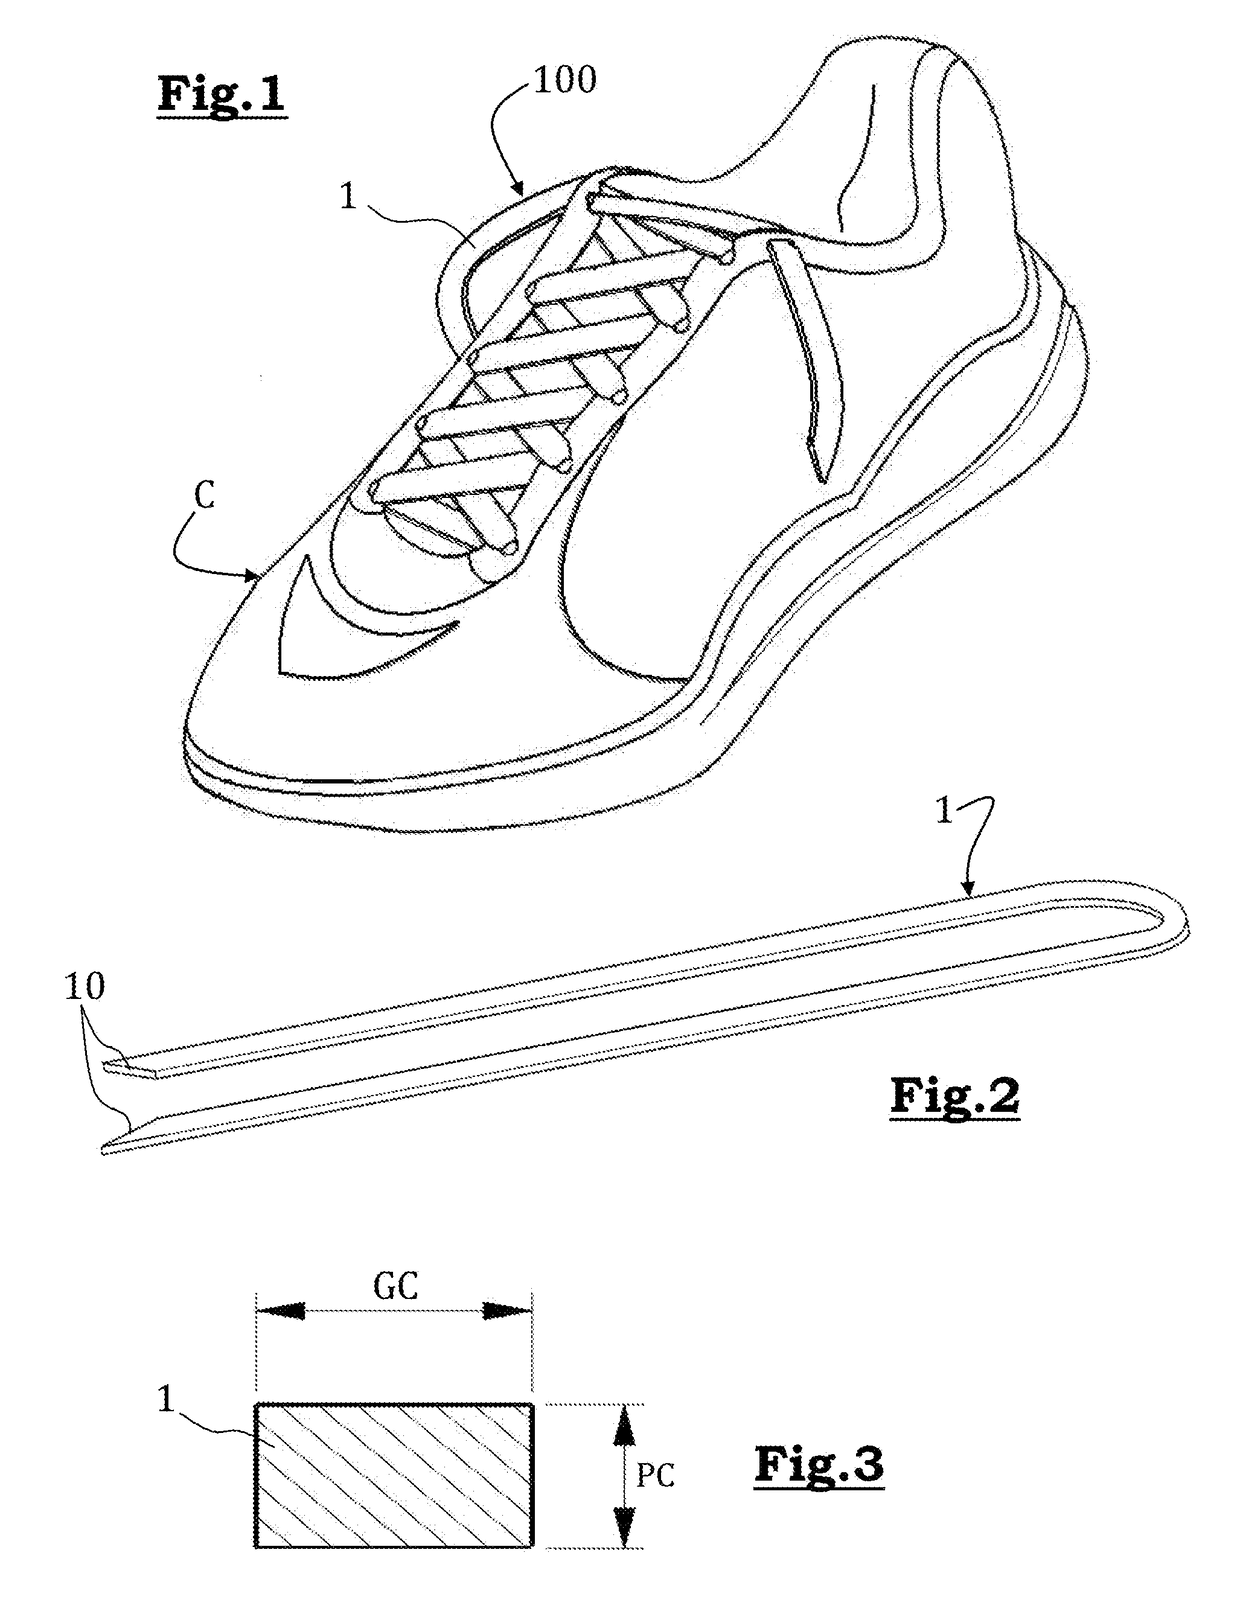 Shoelace comprising a silicone band